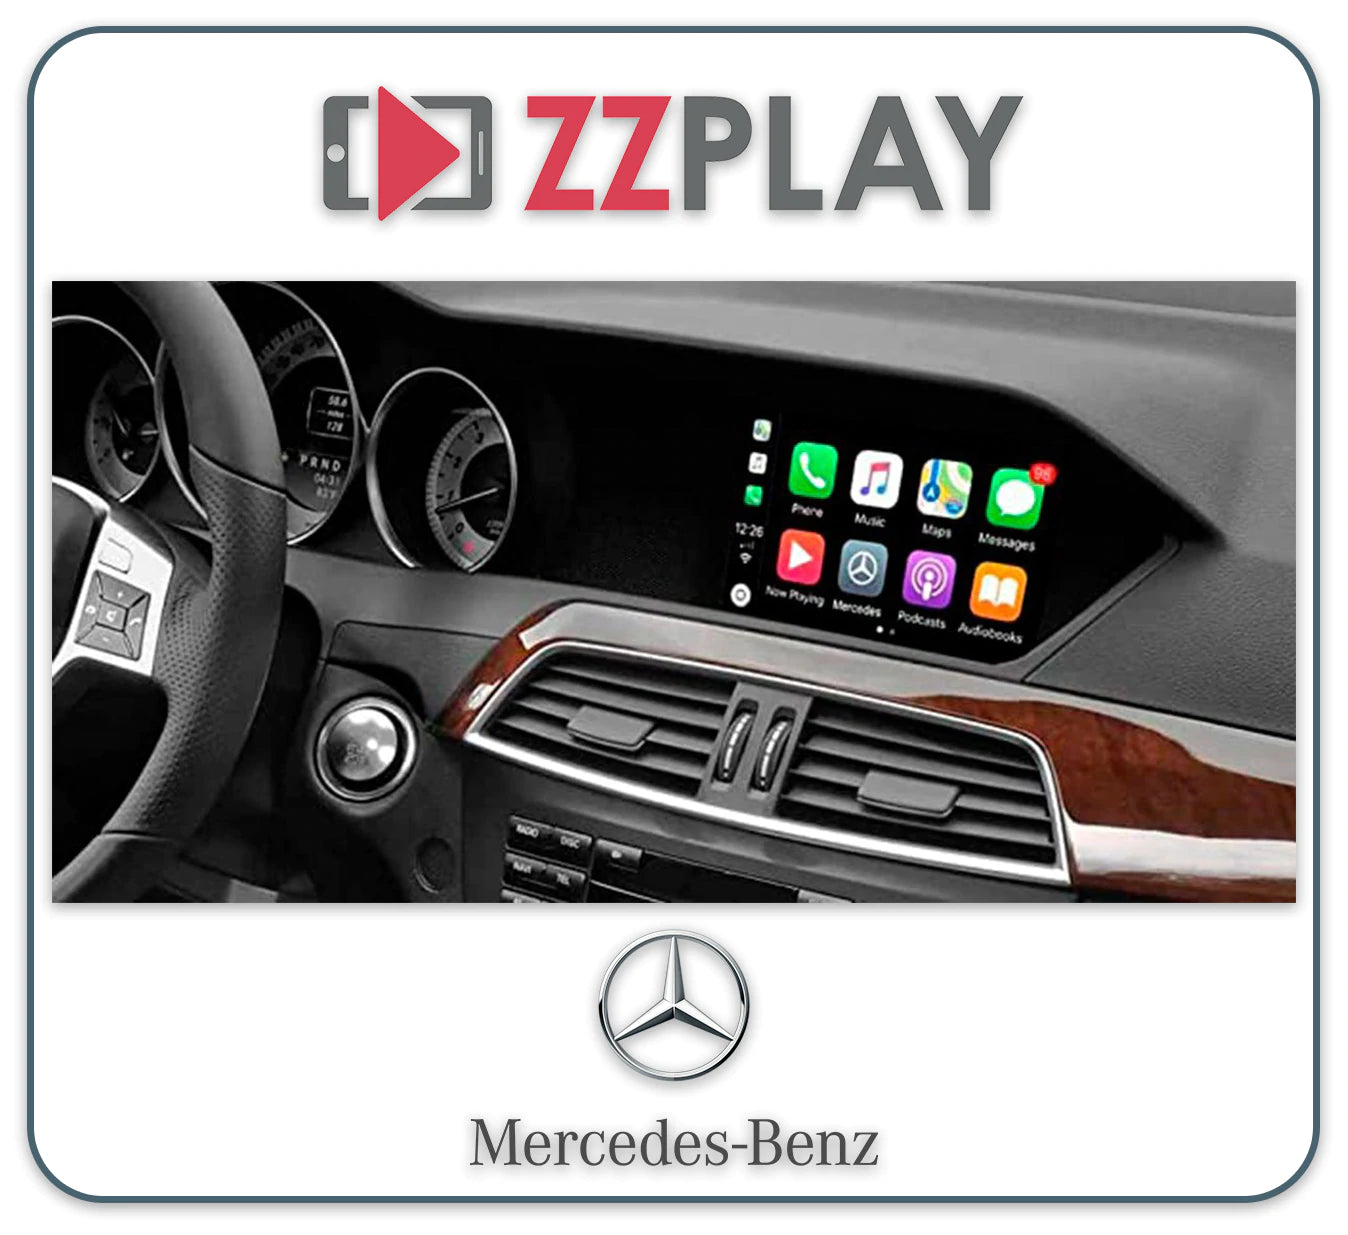 ZZ-2 IT3-NTG45 Wireless CarPlay and Android Auto Interface - Lockdown Security